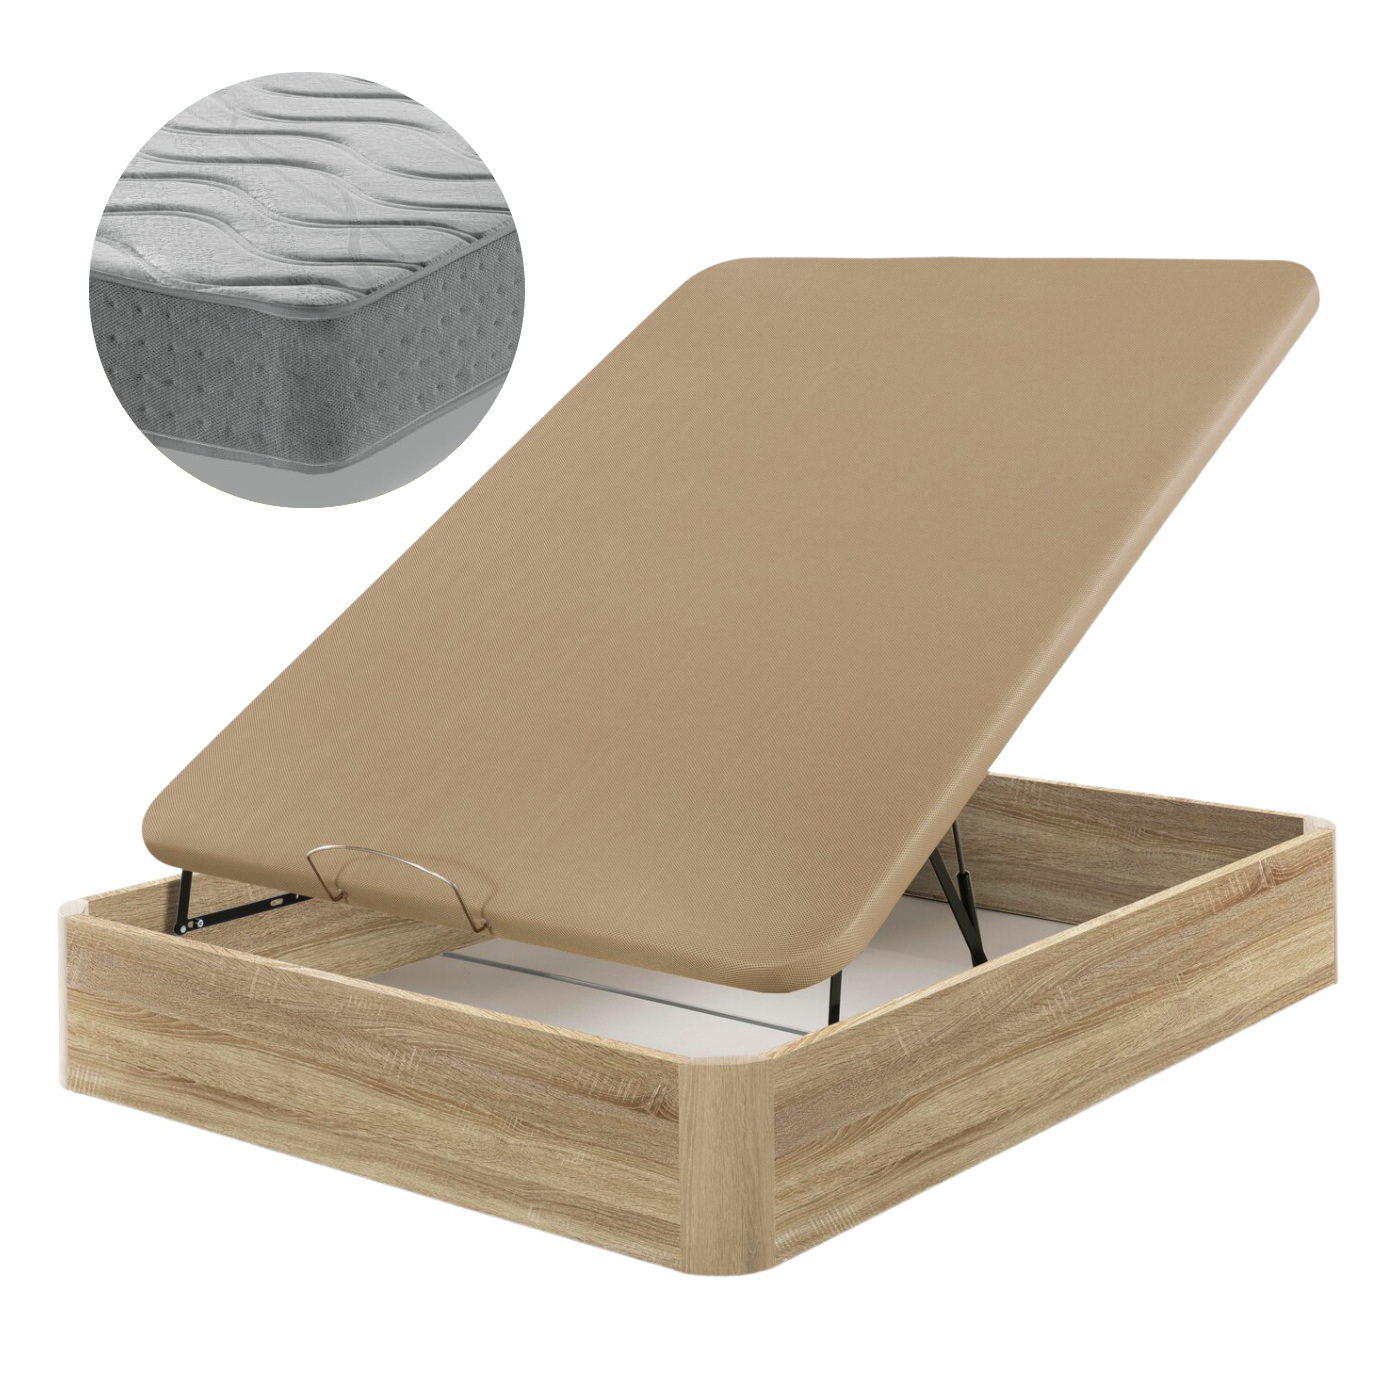 Generation Z Wooden Canapé and Mattress Pack | OAK